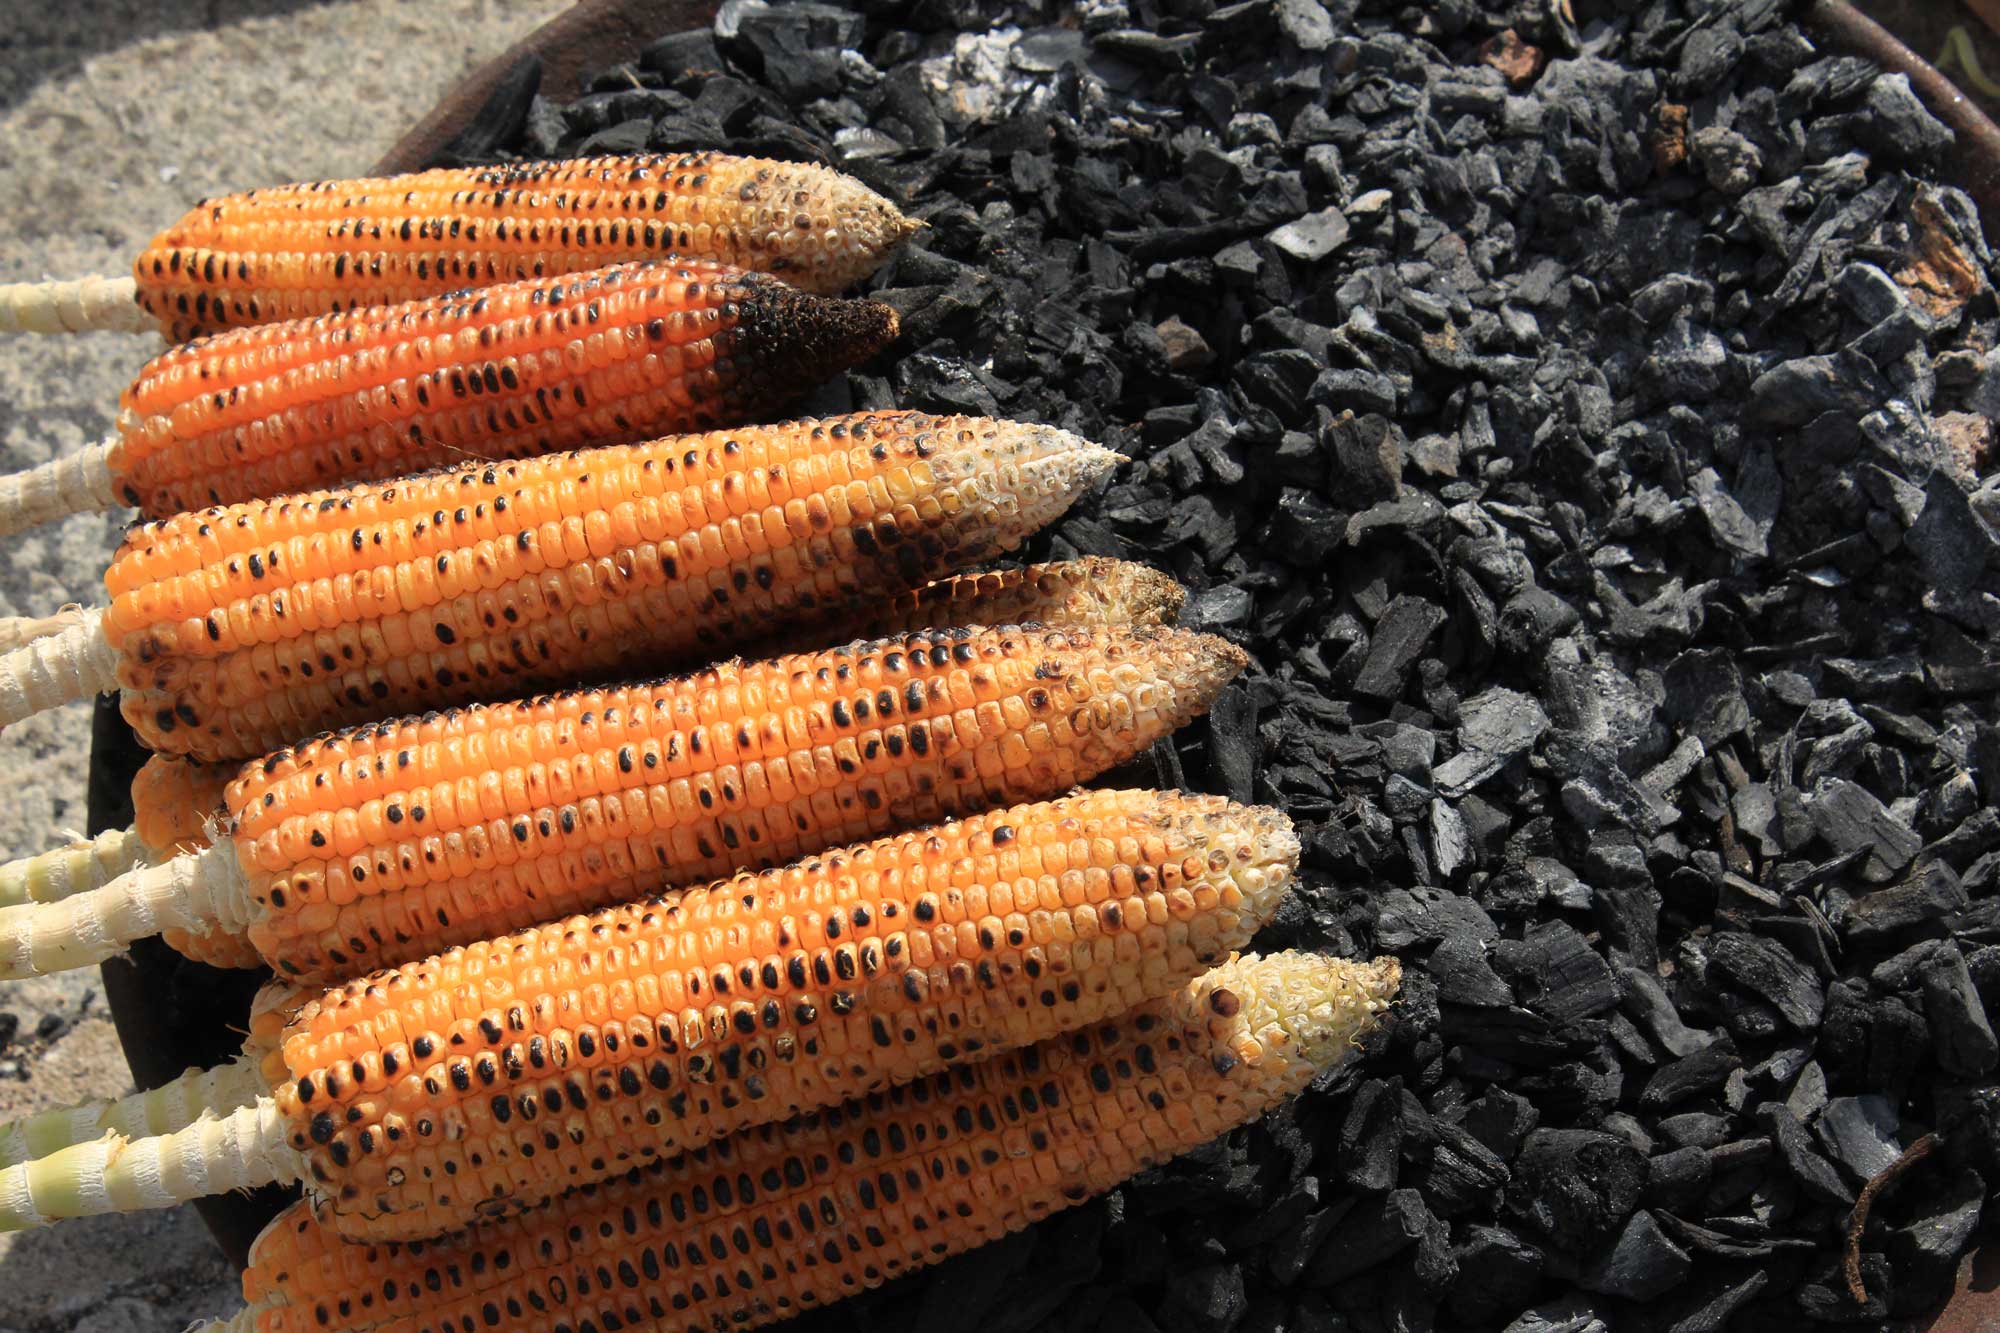 Photograph of bhutta, or corn on the cob roasting over a bed of black coals in Bangalore, India.